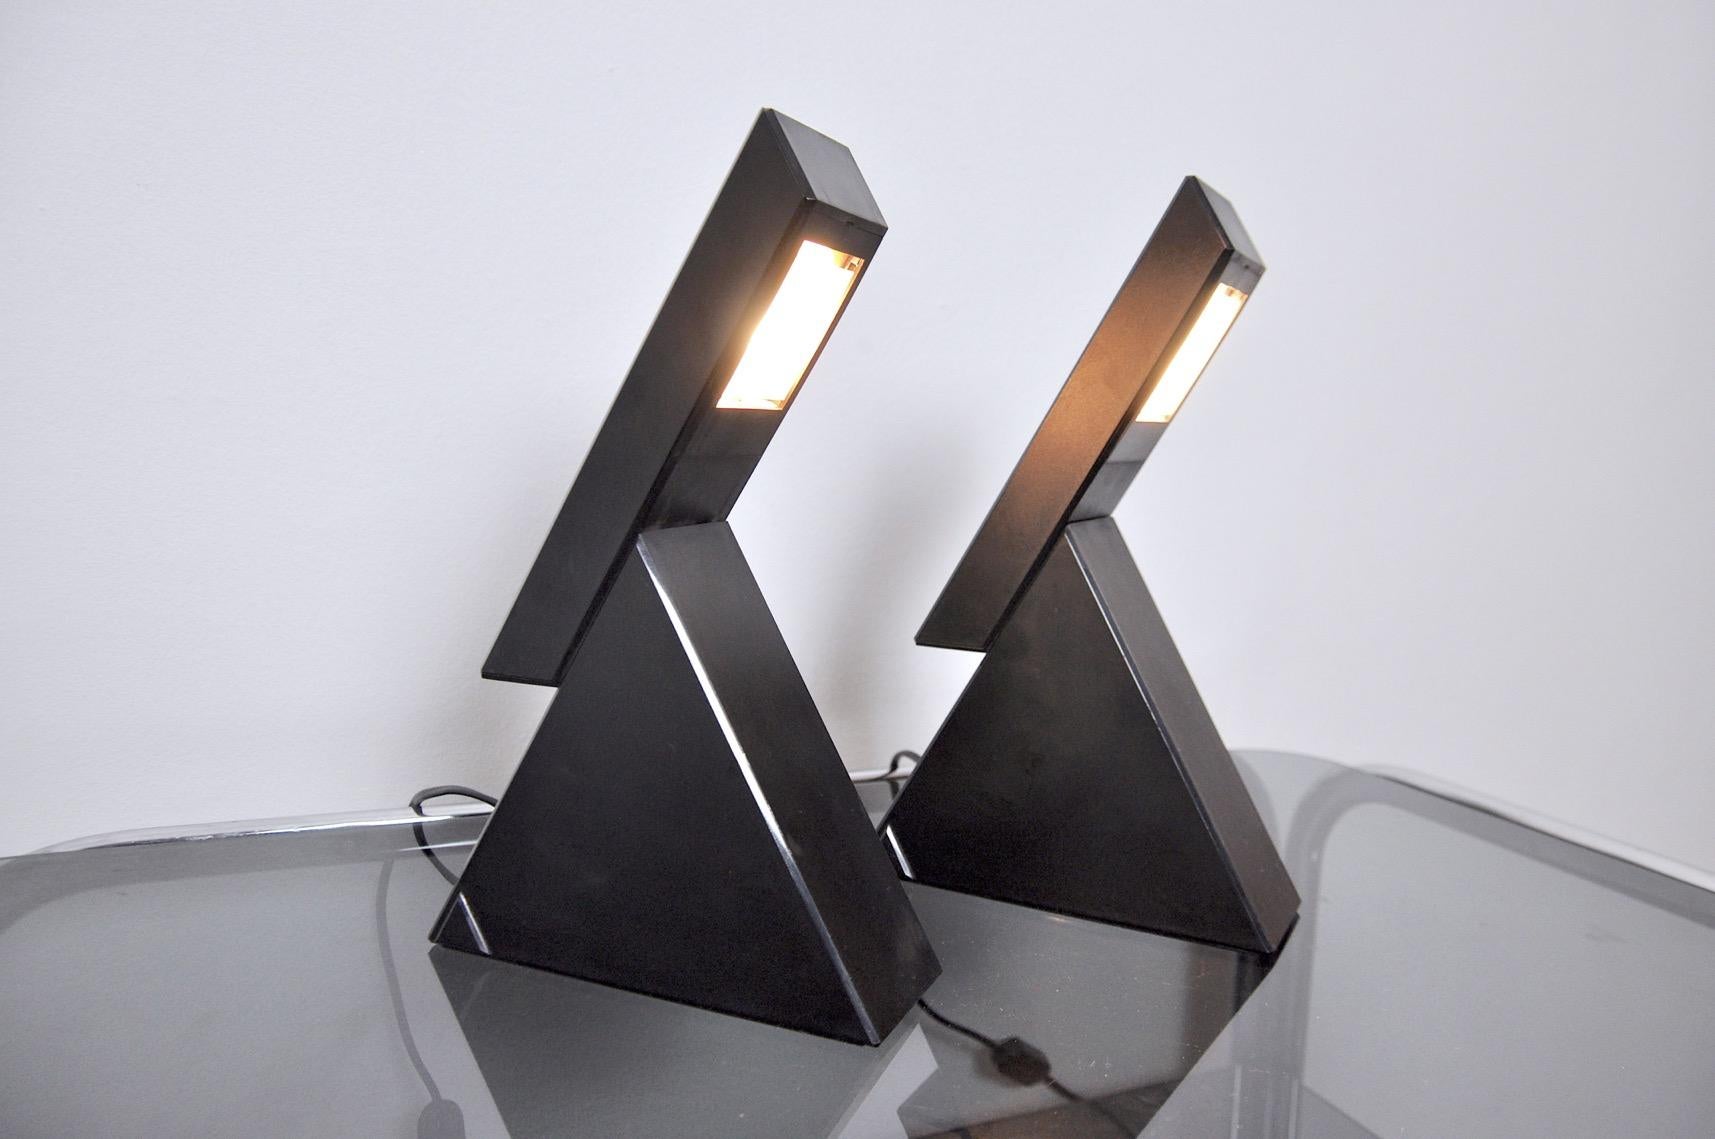 Pair of Delta lamps by Mario Bertorelle for Massangazo designated and produced in Italy around 1970. This pair of lamps with their unique shape will bring a real design touch to your interior. Two brightness levels. Electricity checked, mark of time